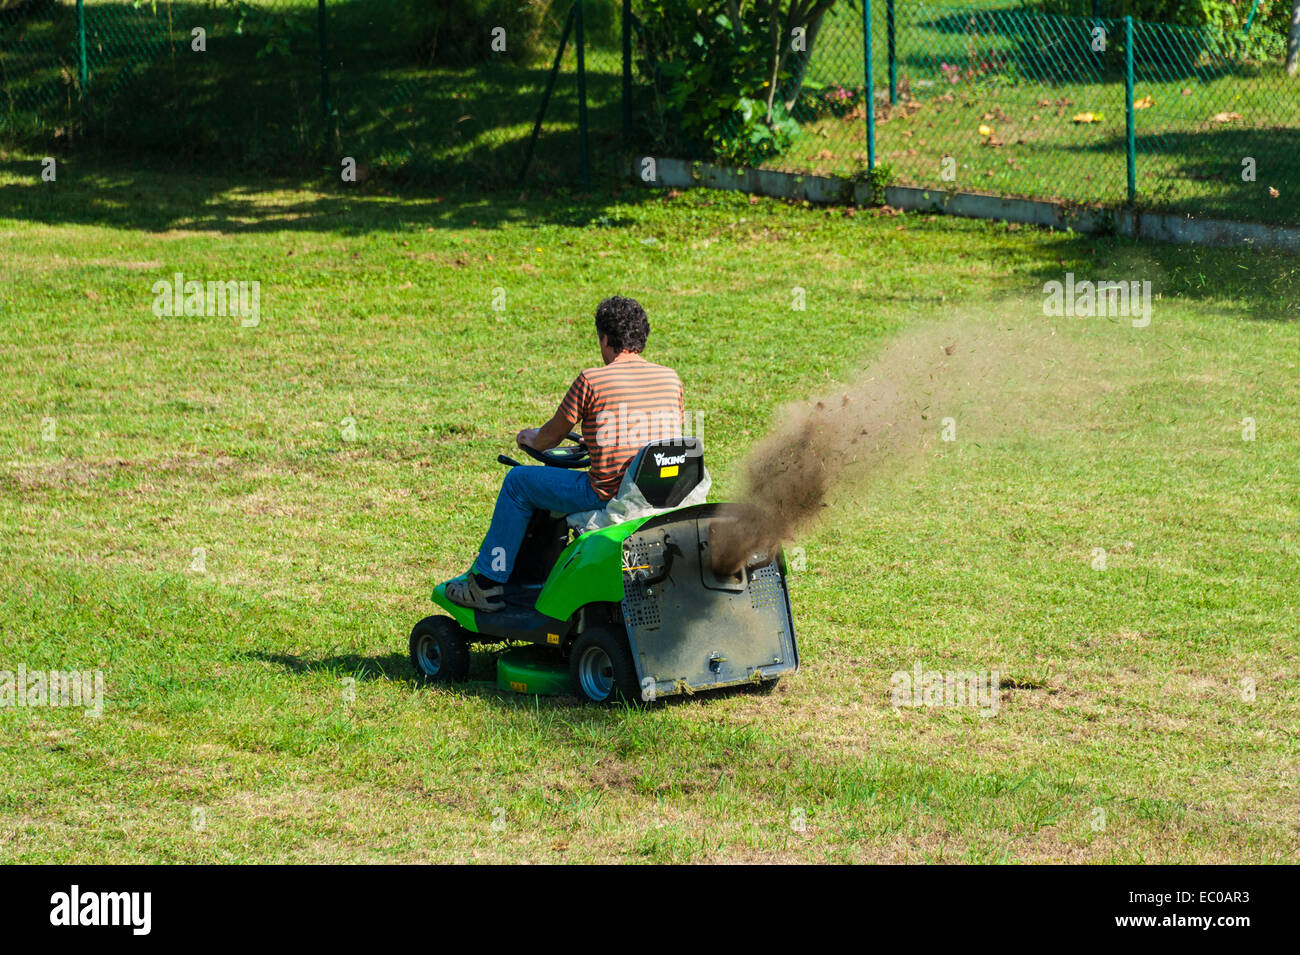 A man on a ride-on mower, cutting the grass without using a grass box and so throwing dust and stones into the air. Stock Photo